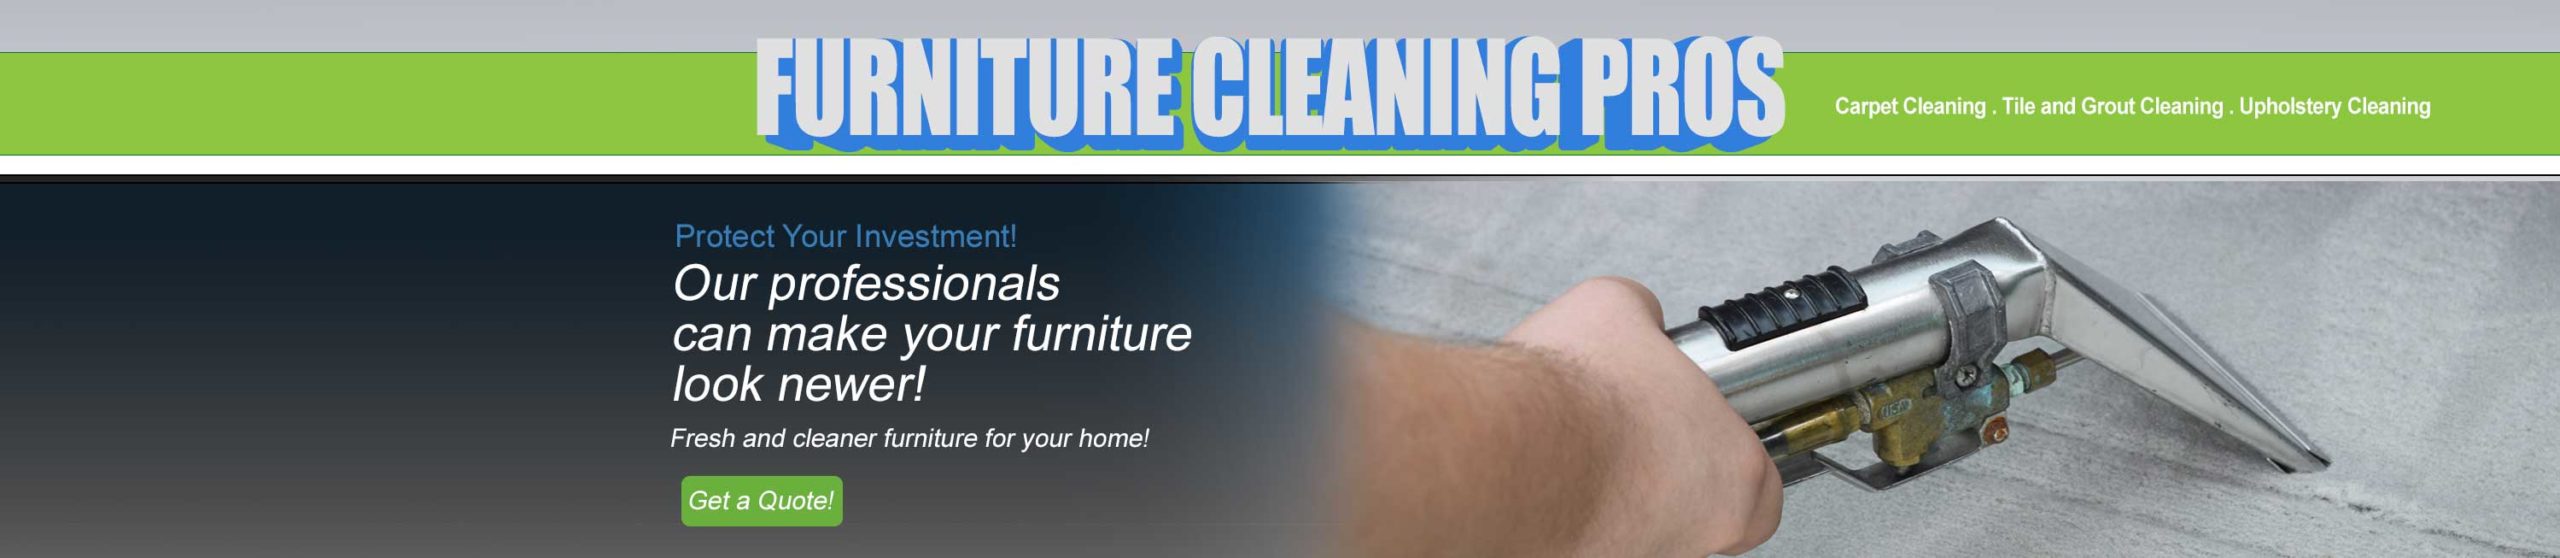 Furniture and upholstery cleaning in Mesa AZ